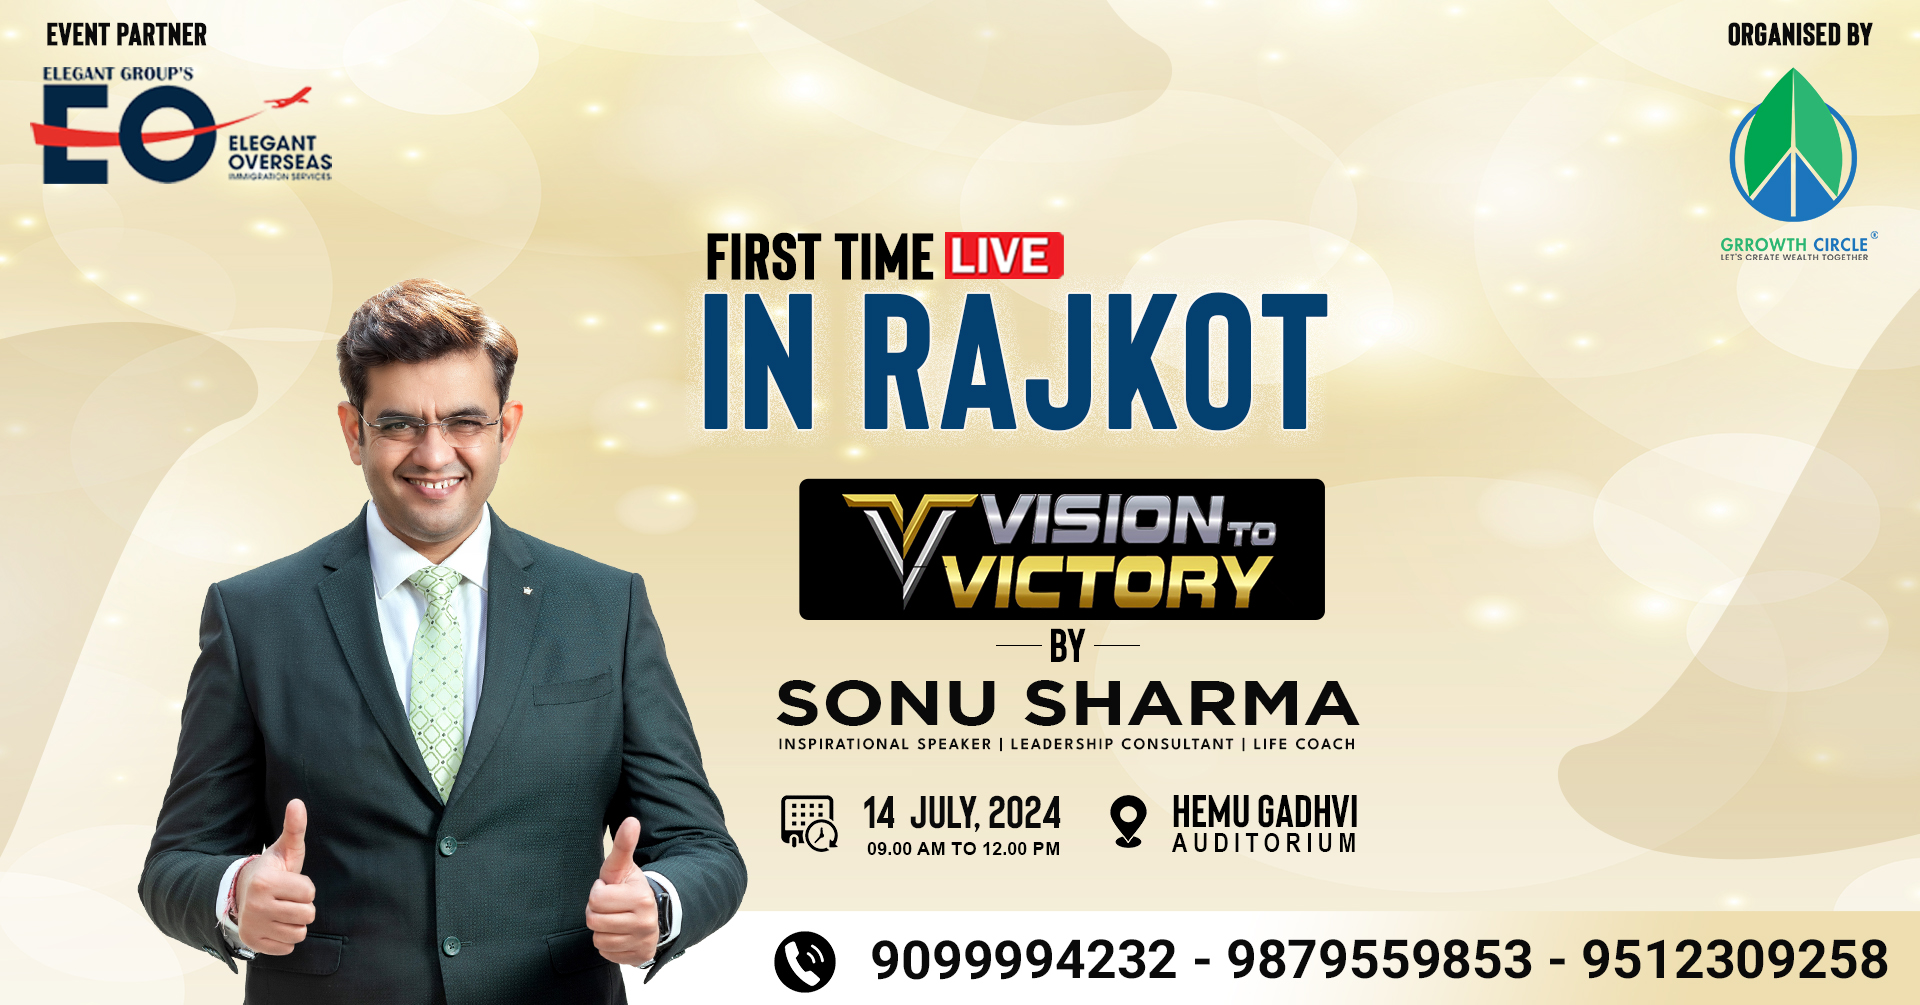 "Vision to Victory" By Sonu Sharma Live In Rajkot